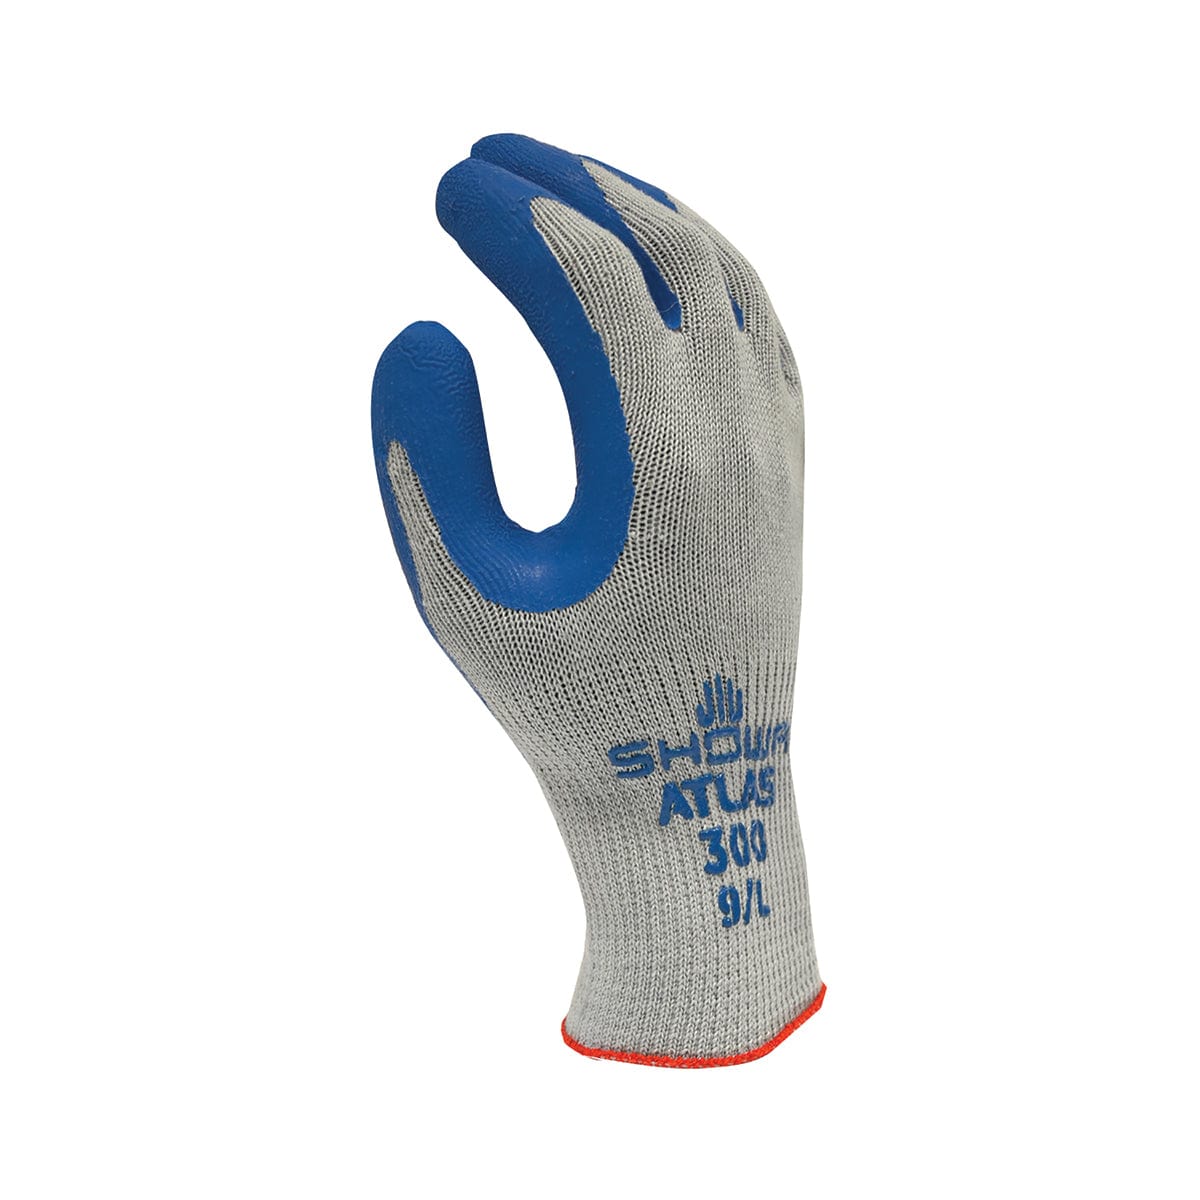 Showa Atlas 300 Rubber Palm Coated Gloves